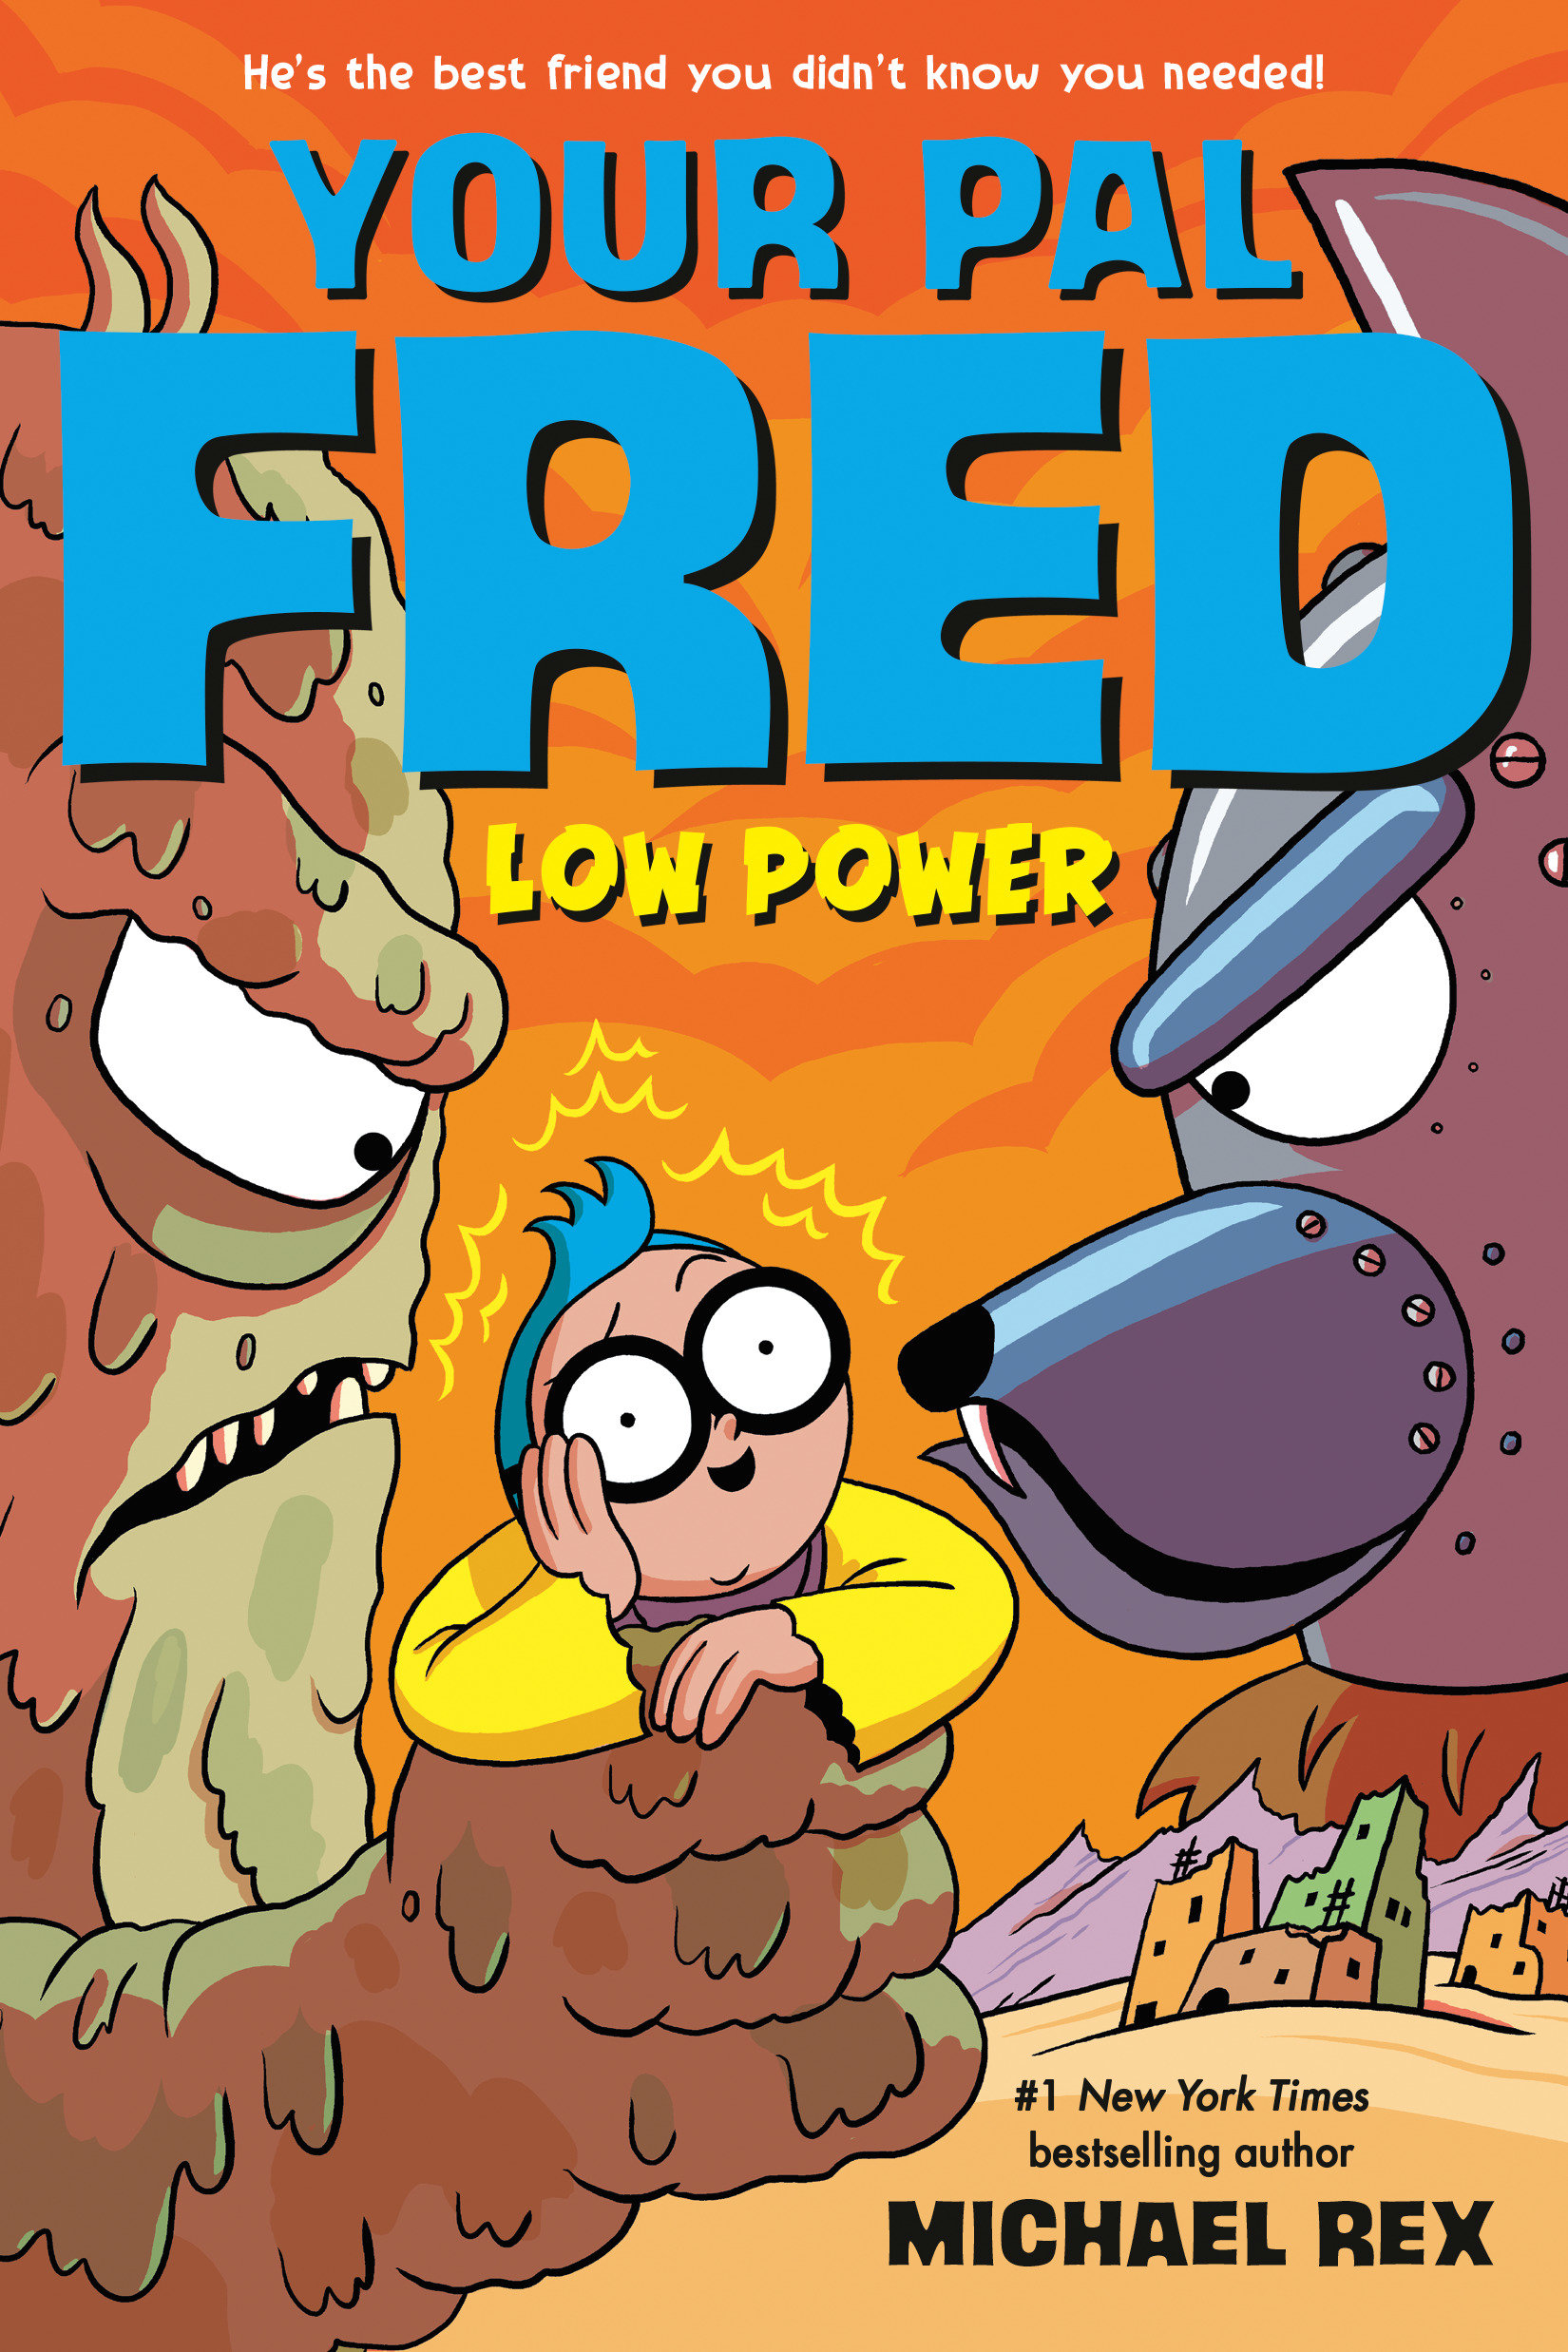 Your Pal Fred Graphic Novel Volume 2 Low Power